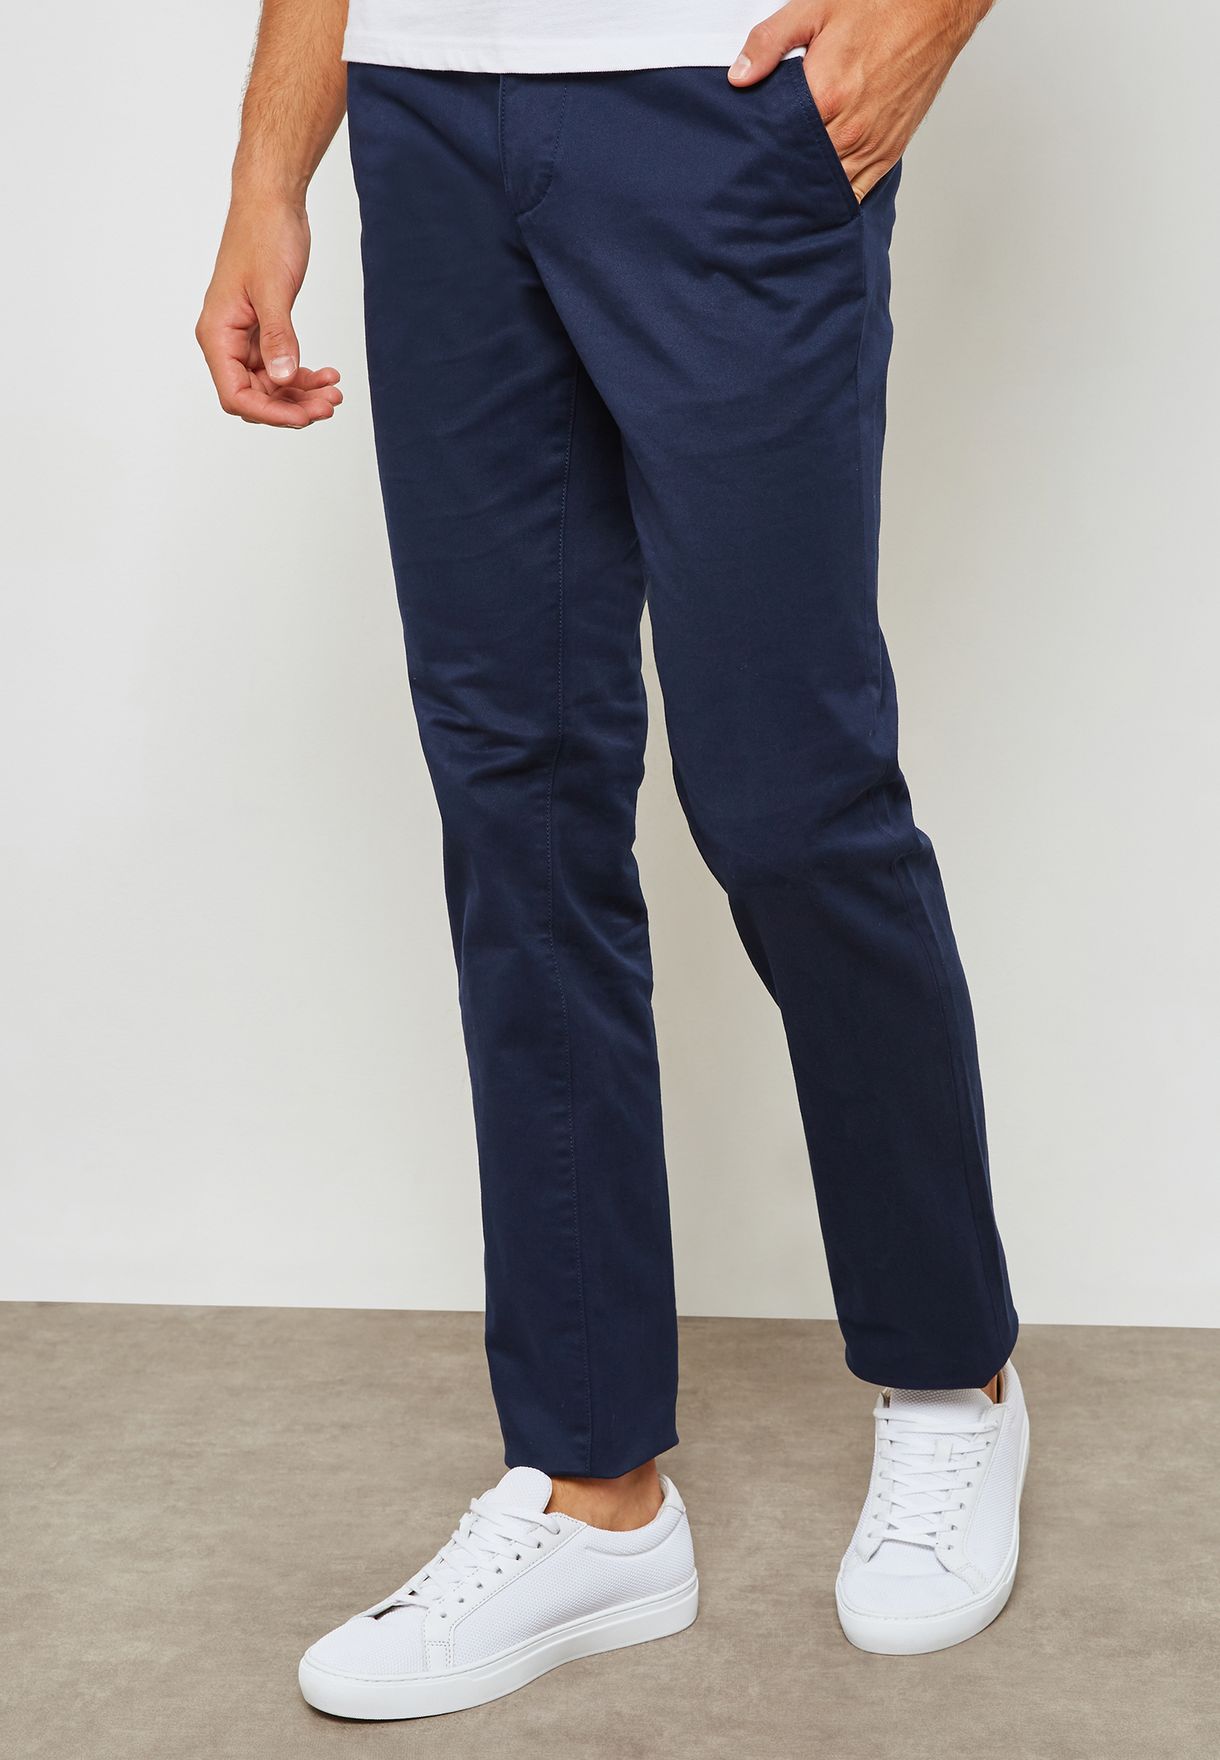 Buy Lacoste navy Slim Fit Chinos for 